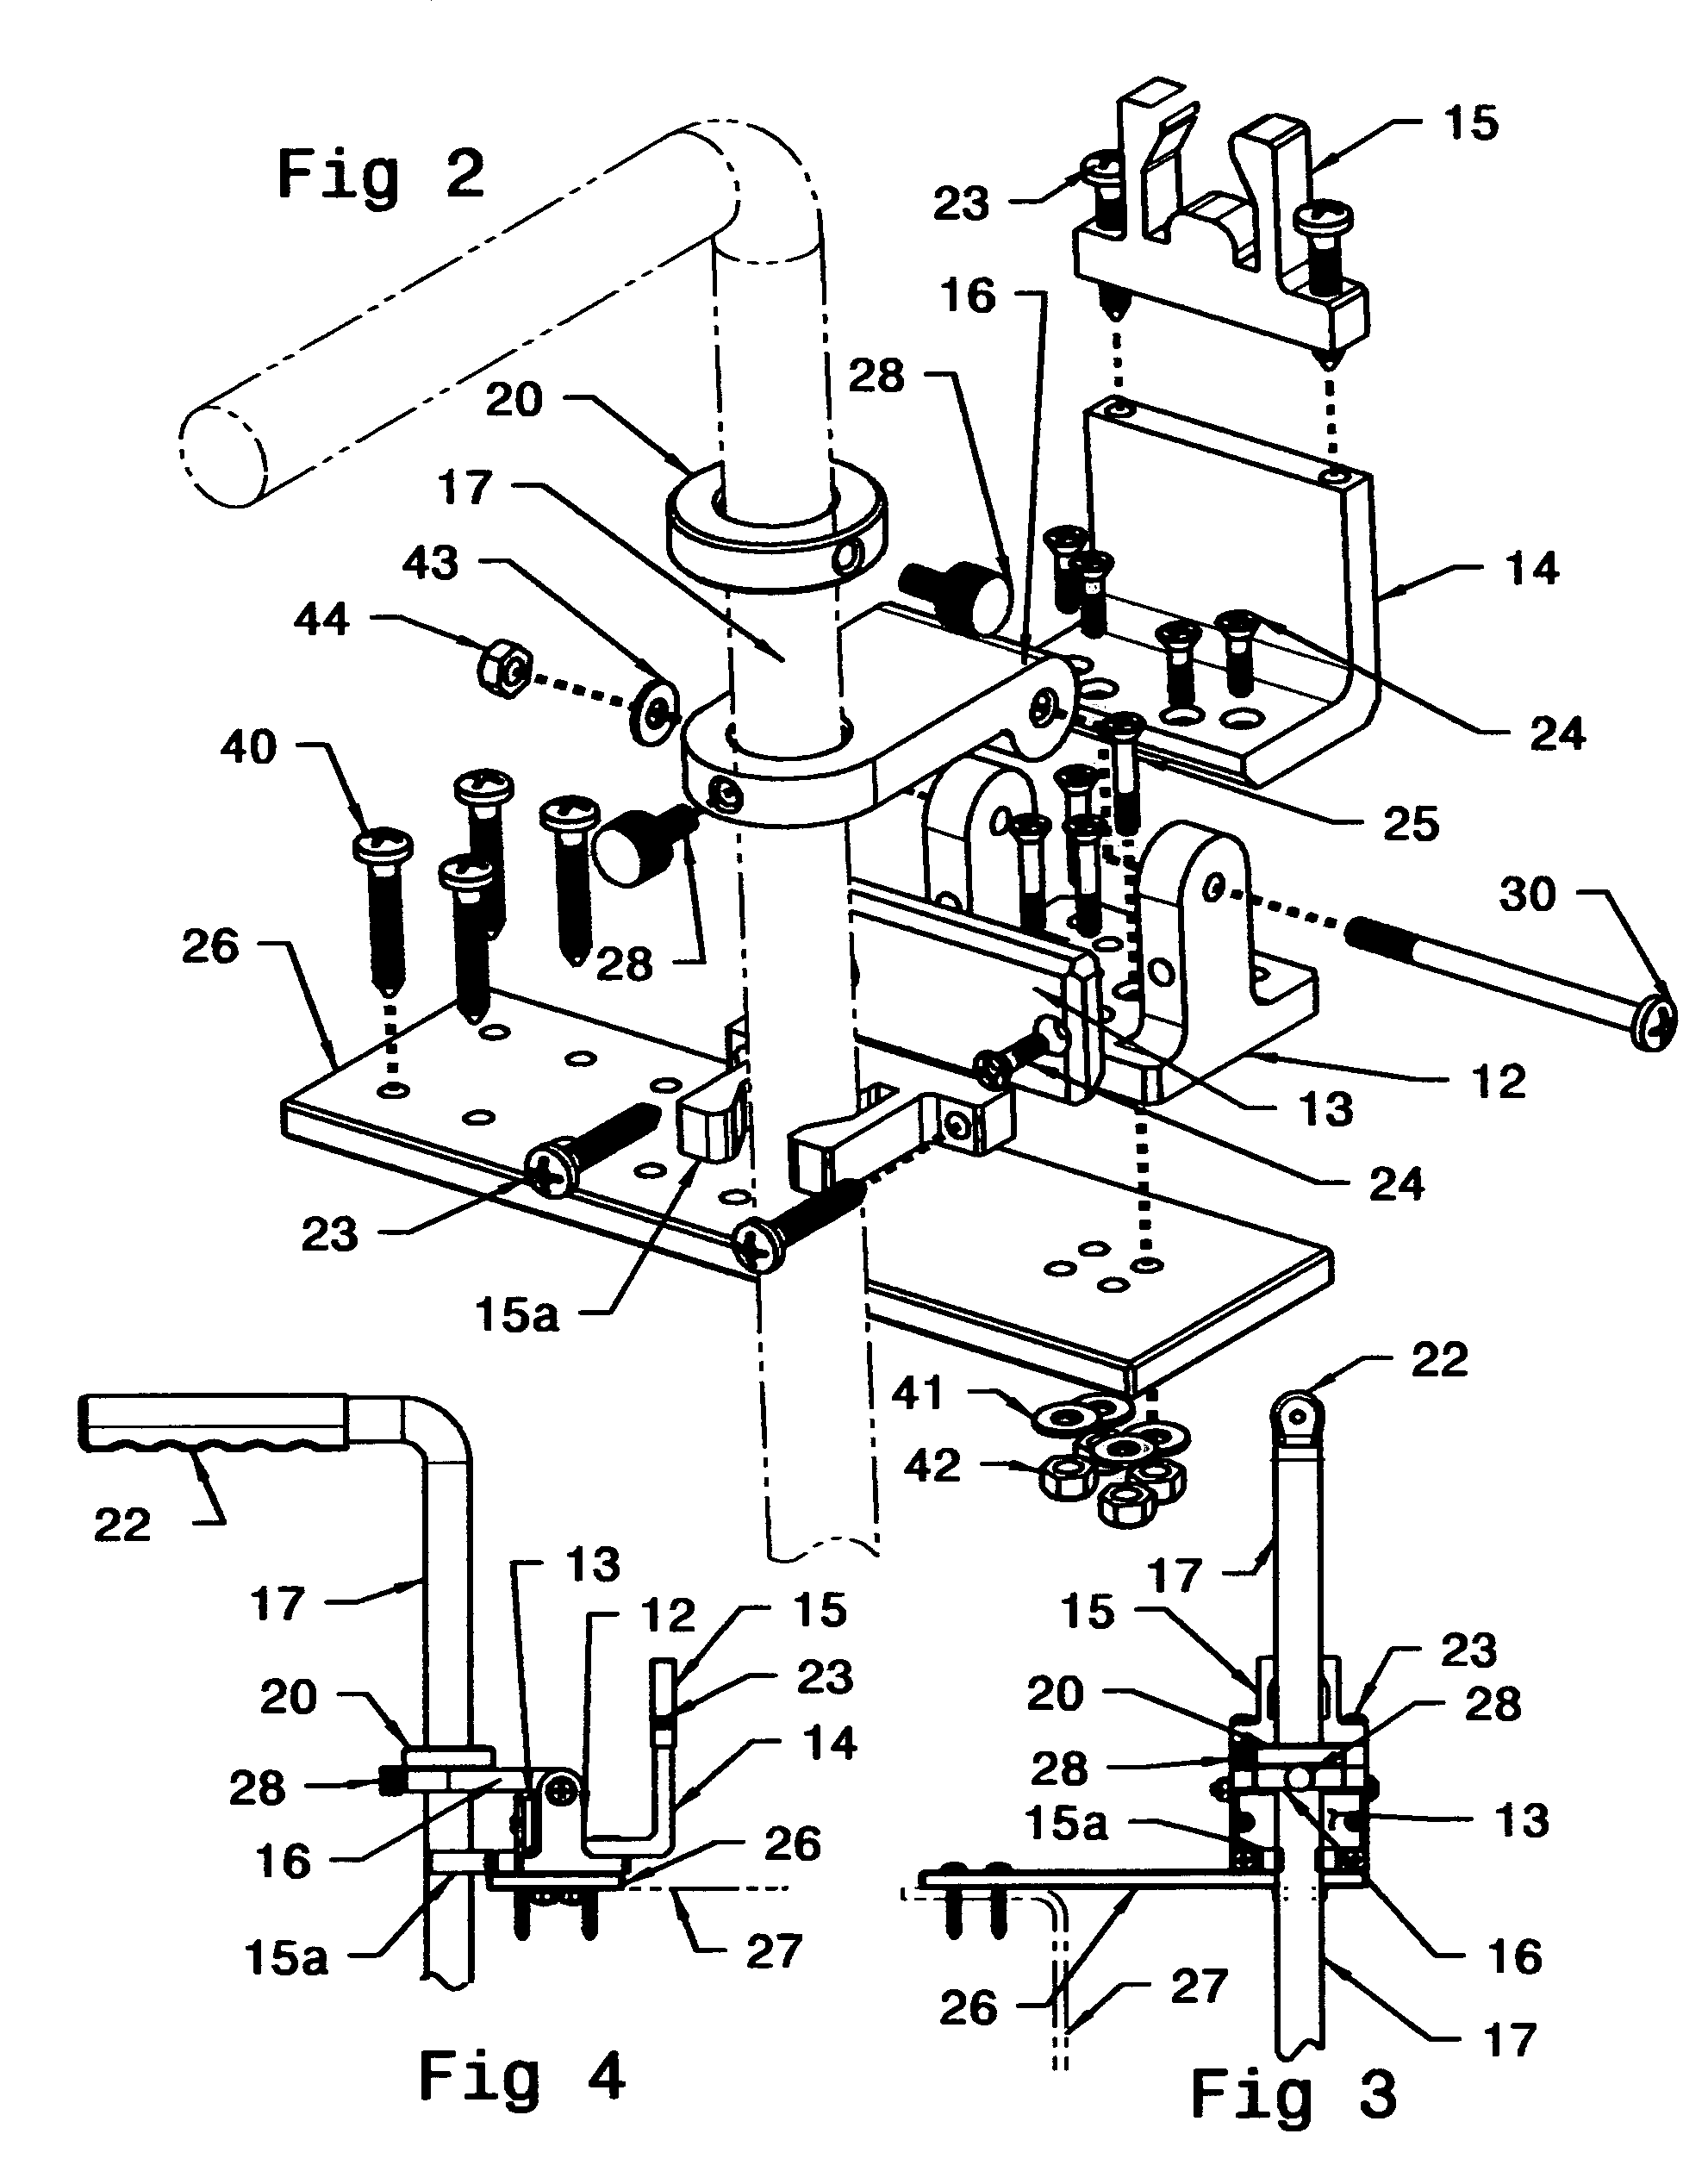 Apparatus for mounting underwater marine detection equipment on a waterborne vessel